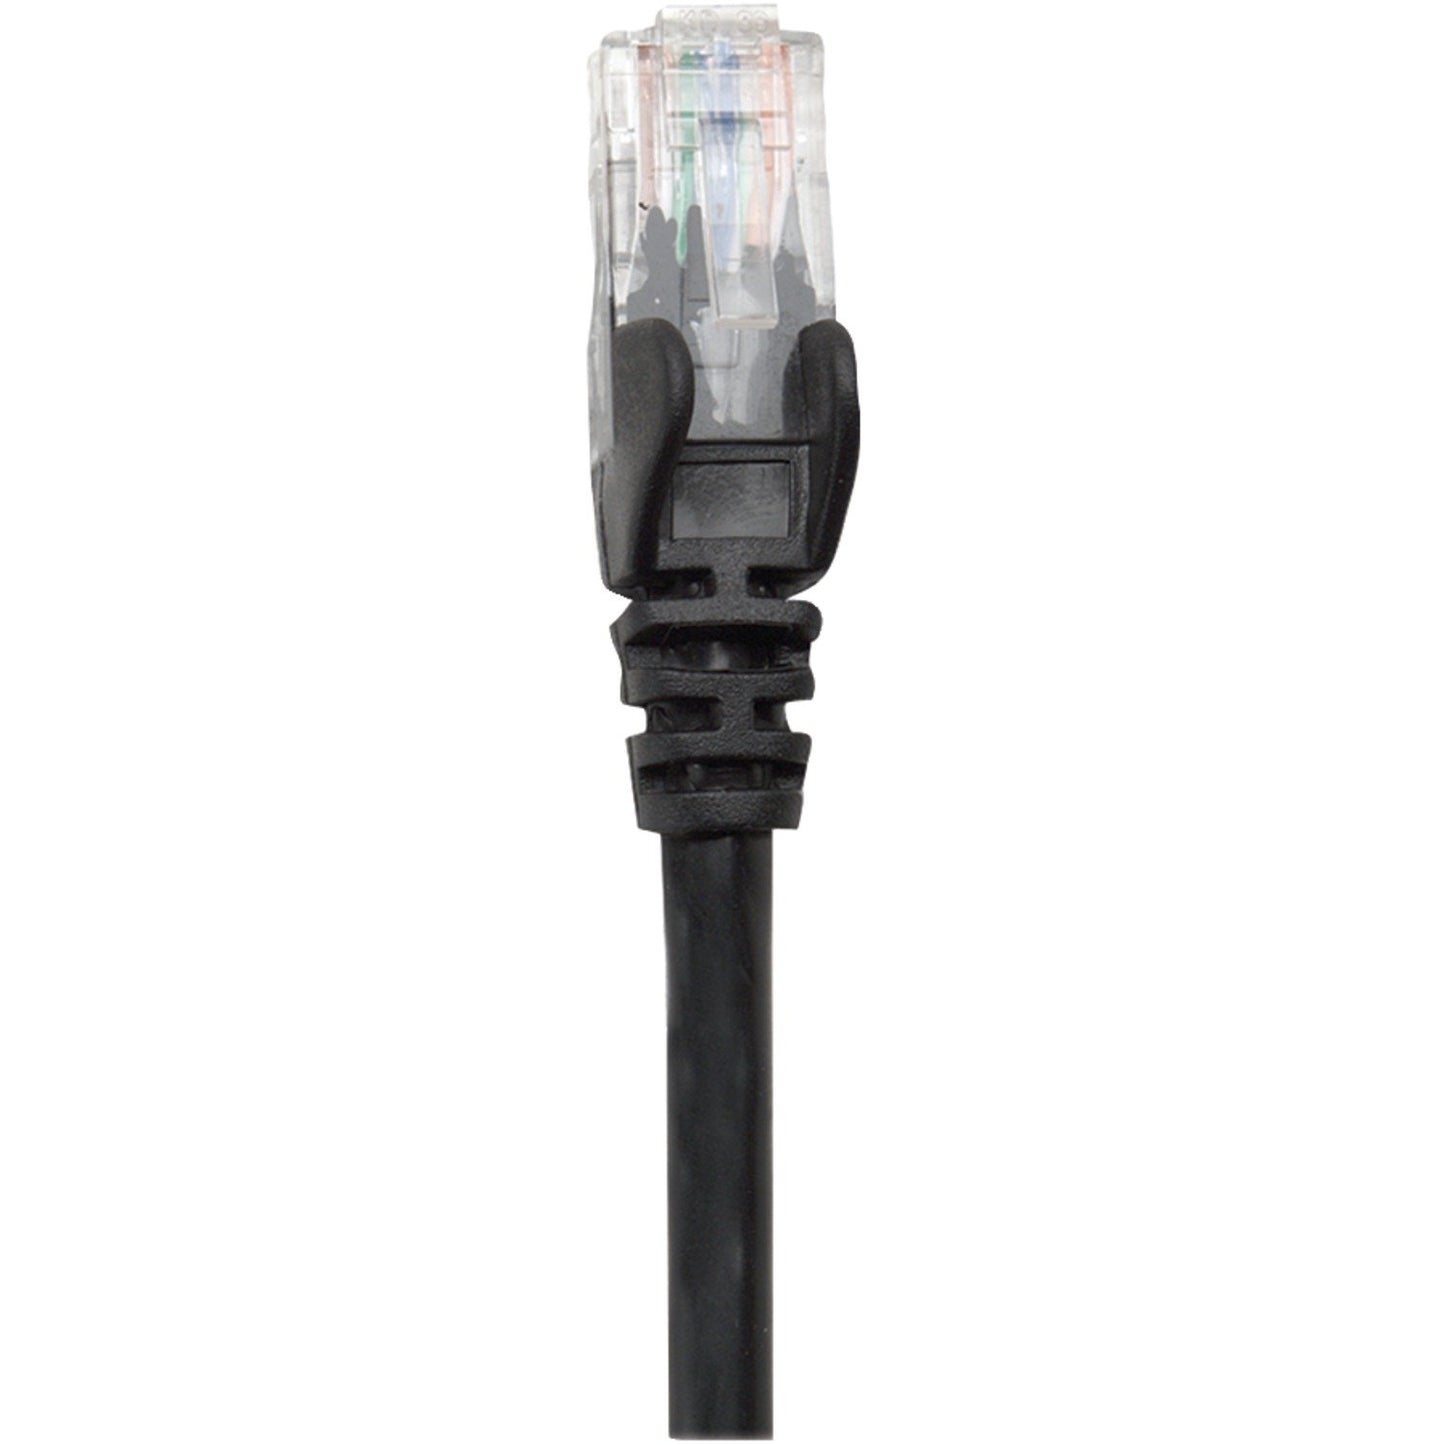 Intellinet Network Solutions 320801 CAT-5E UTP Patch Cable (100ft)